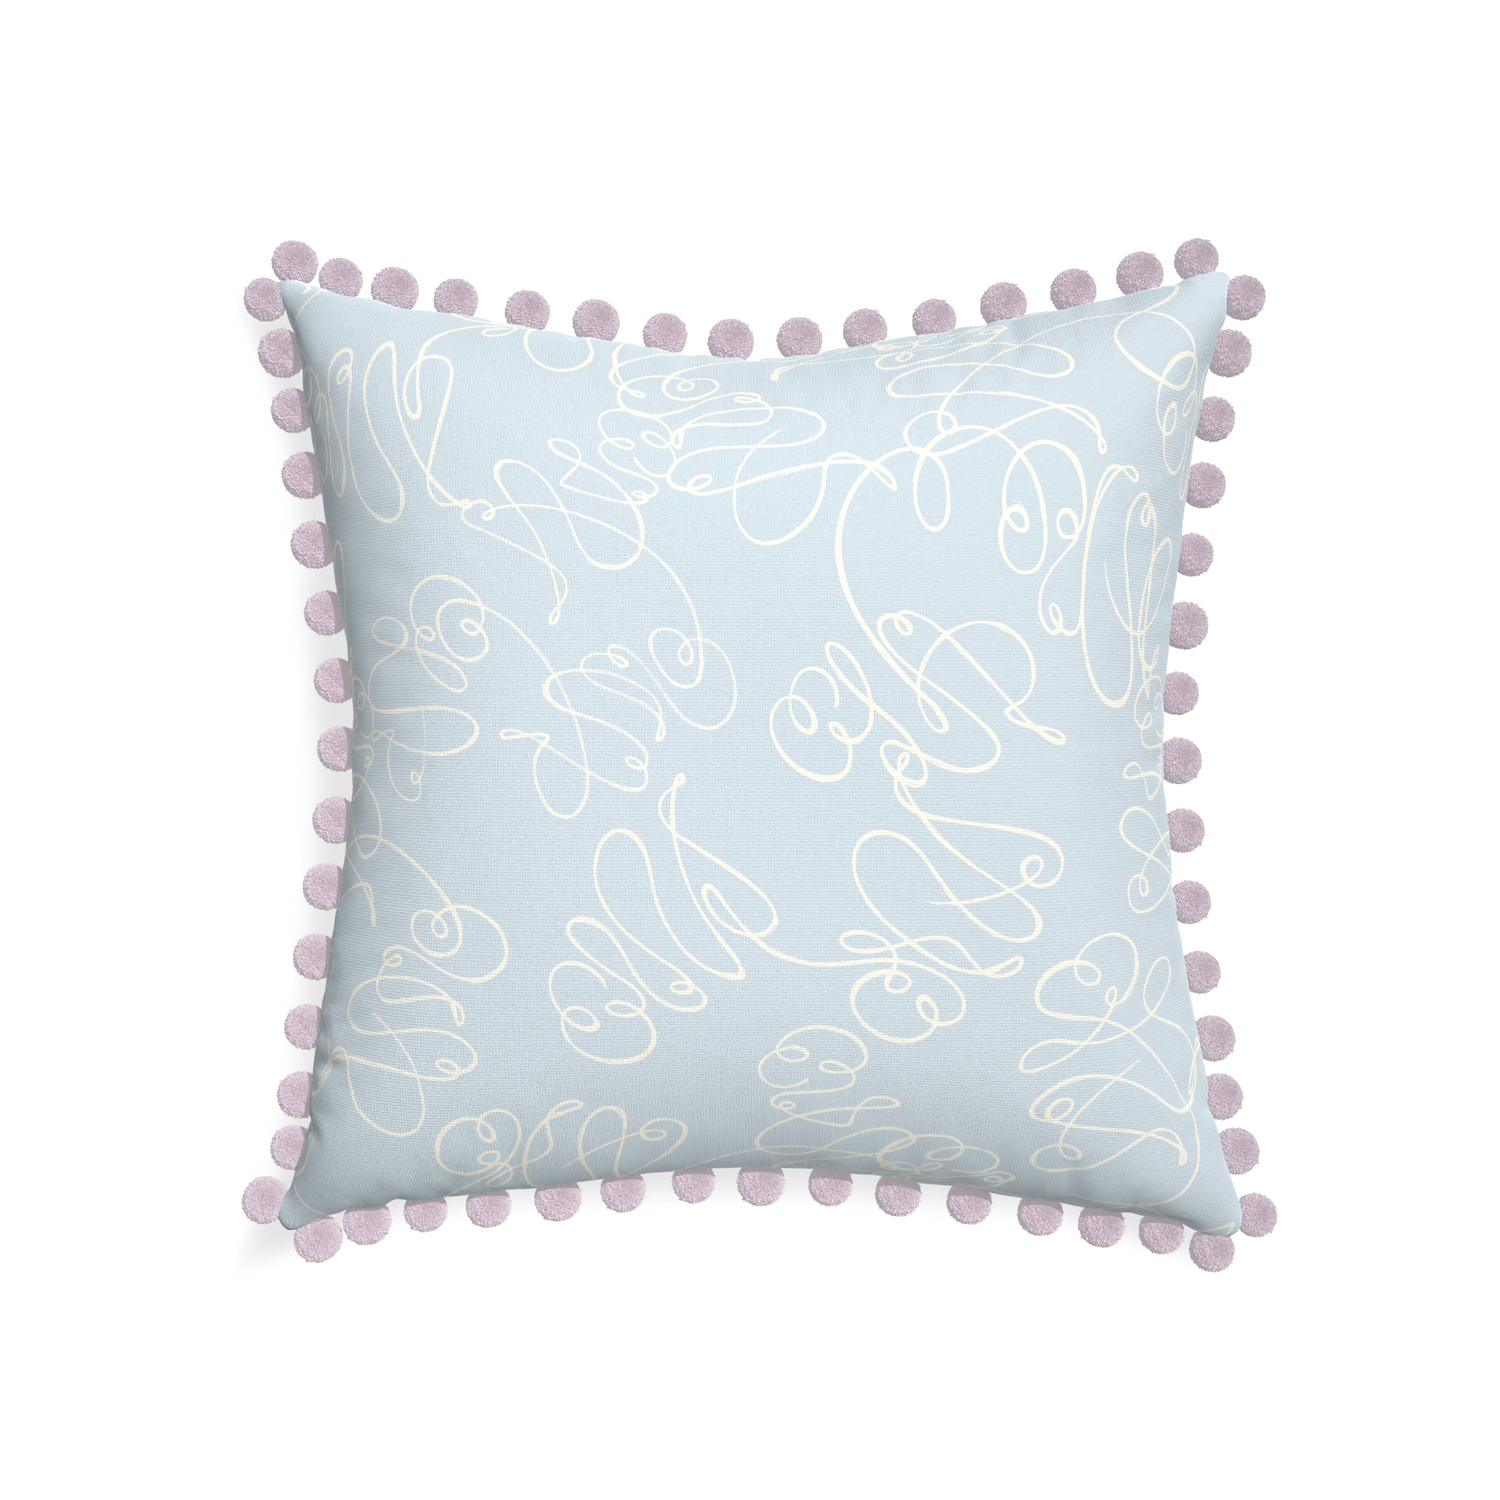 22-square mirabella custom pillow with l on white background